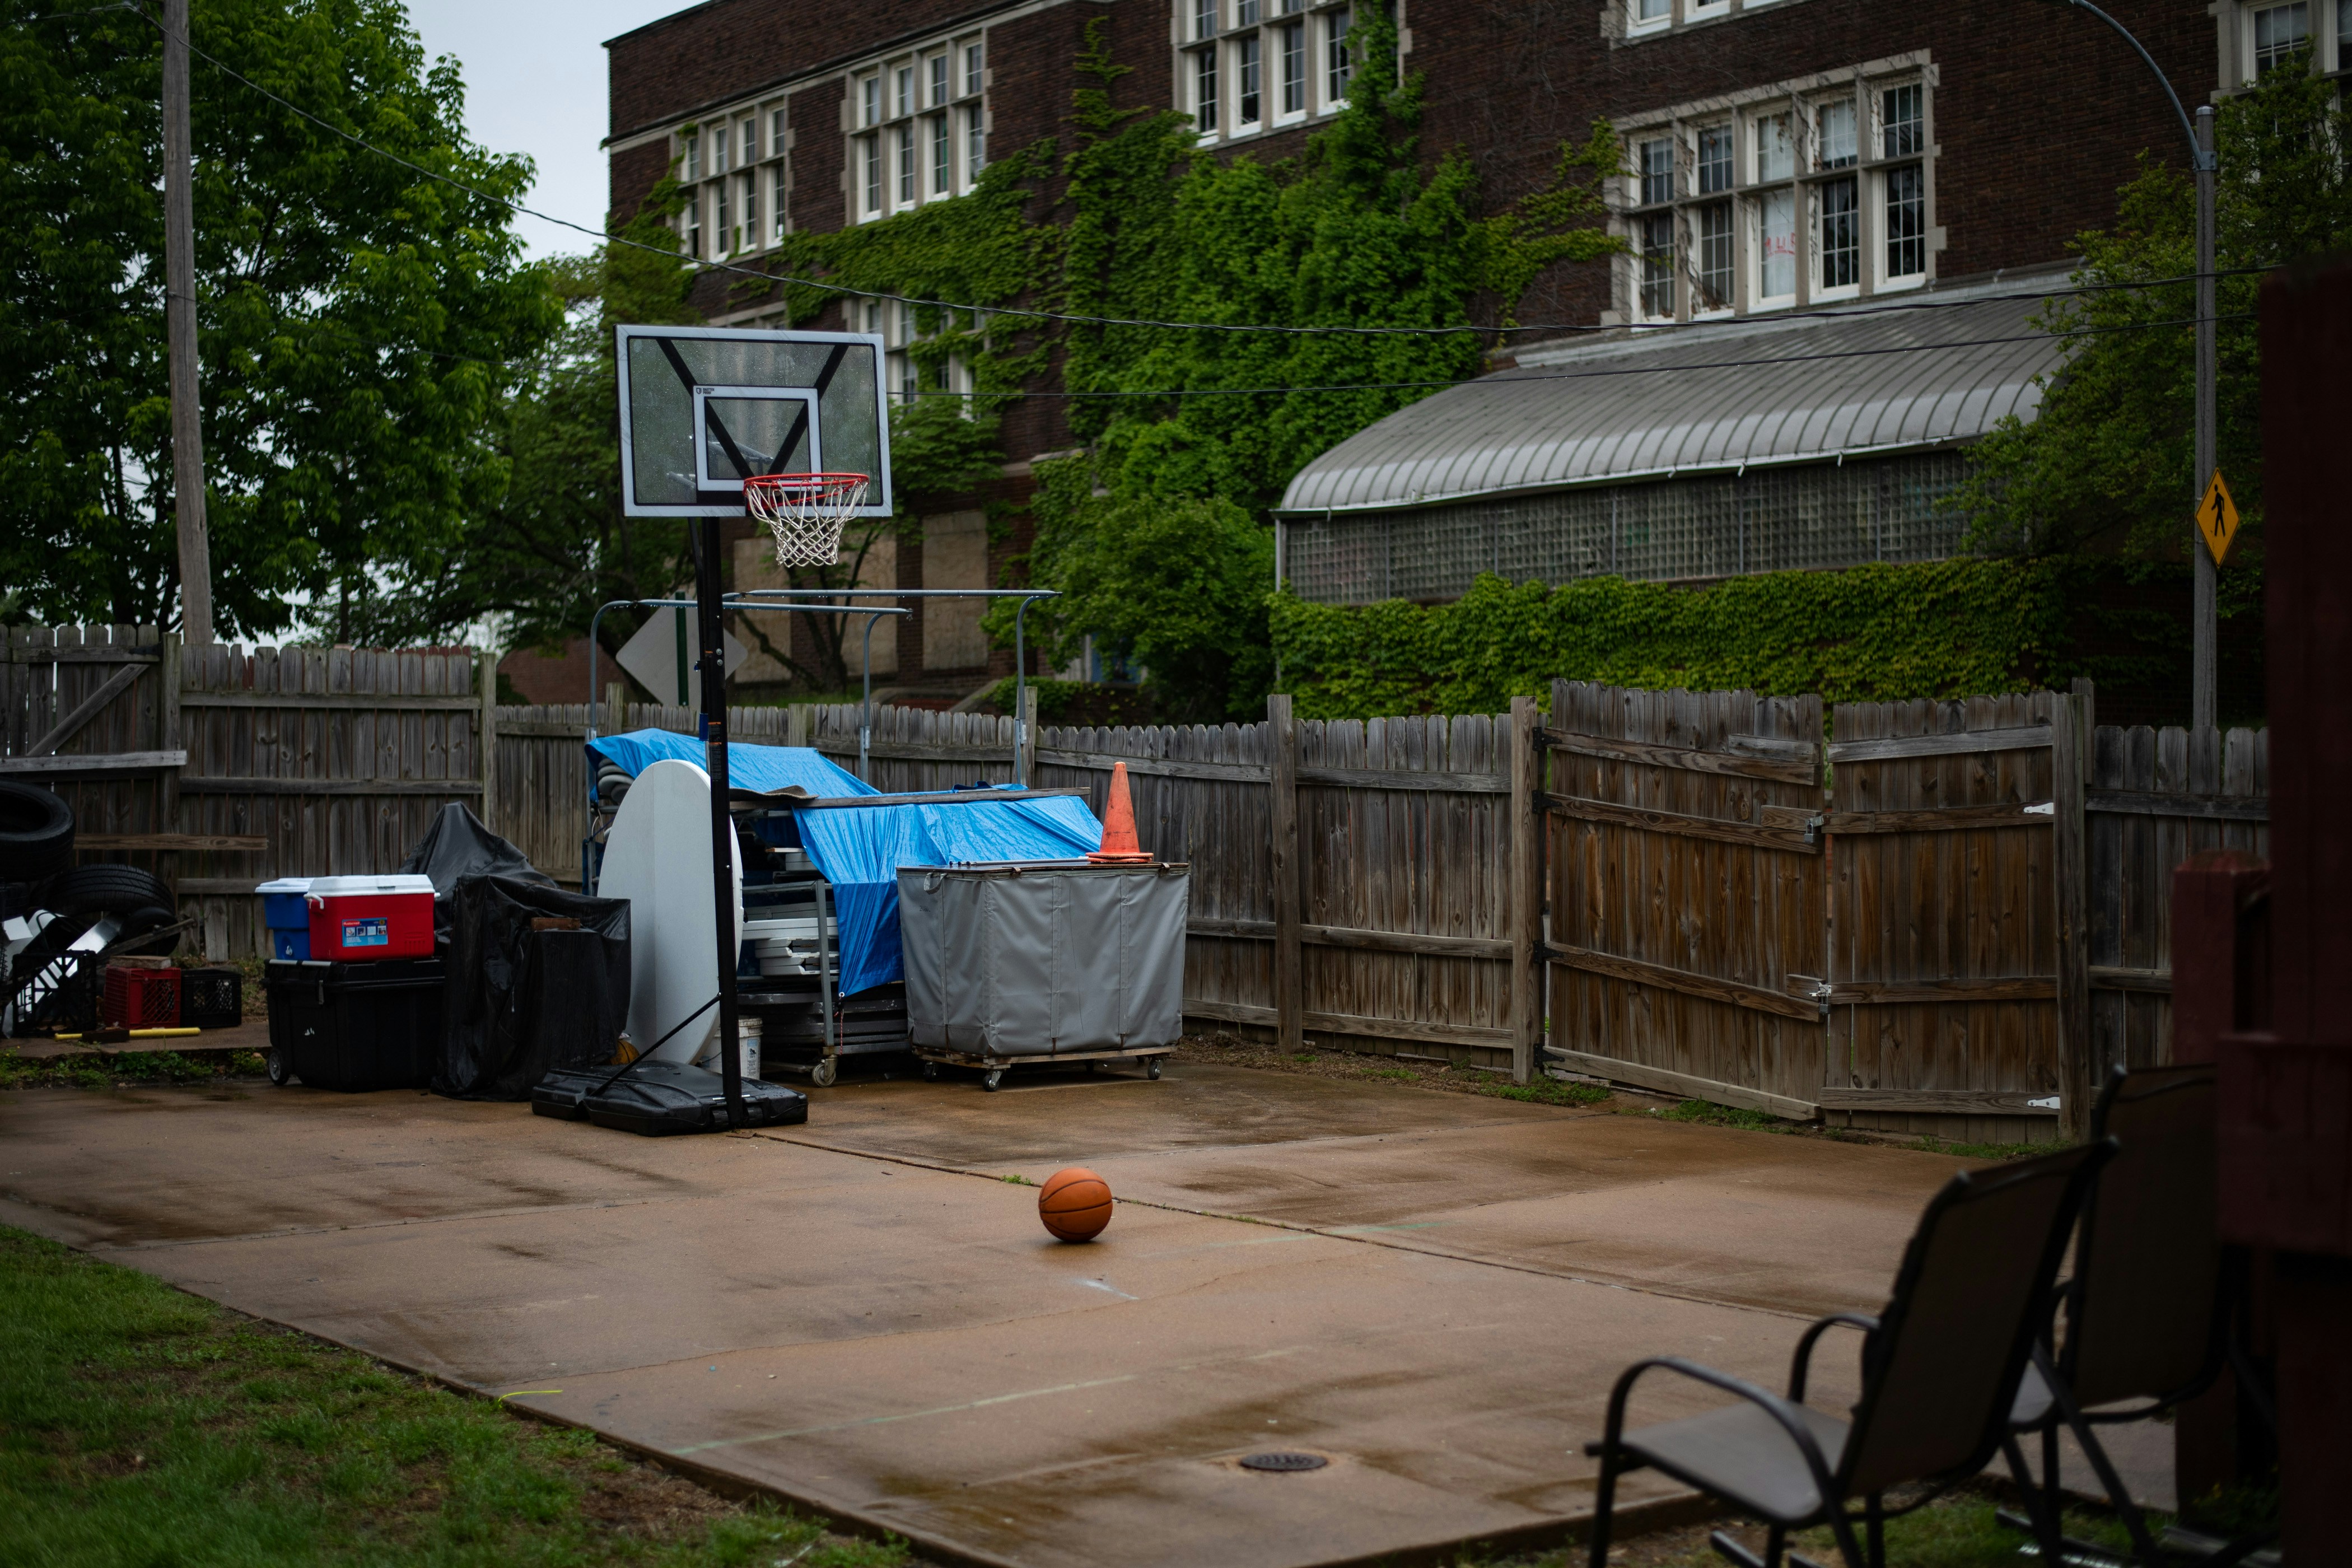 A basketball court is seen in the backyard at the home of Antoine and Tammy Bufford on May 16, 2021 in St. Louis, Missouri. Photo by Michael B. Thomas for The Intercept